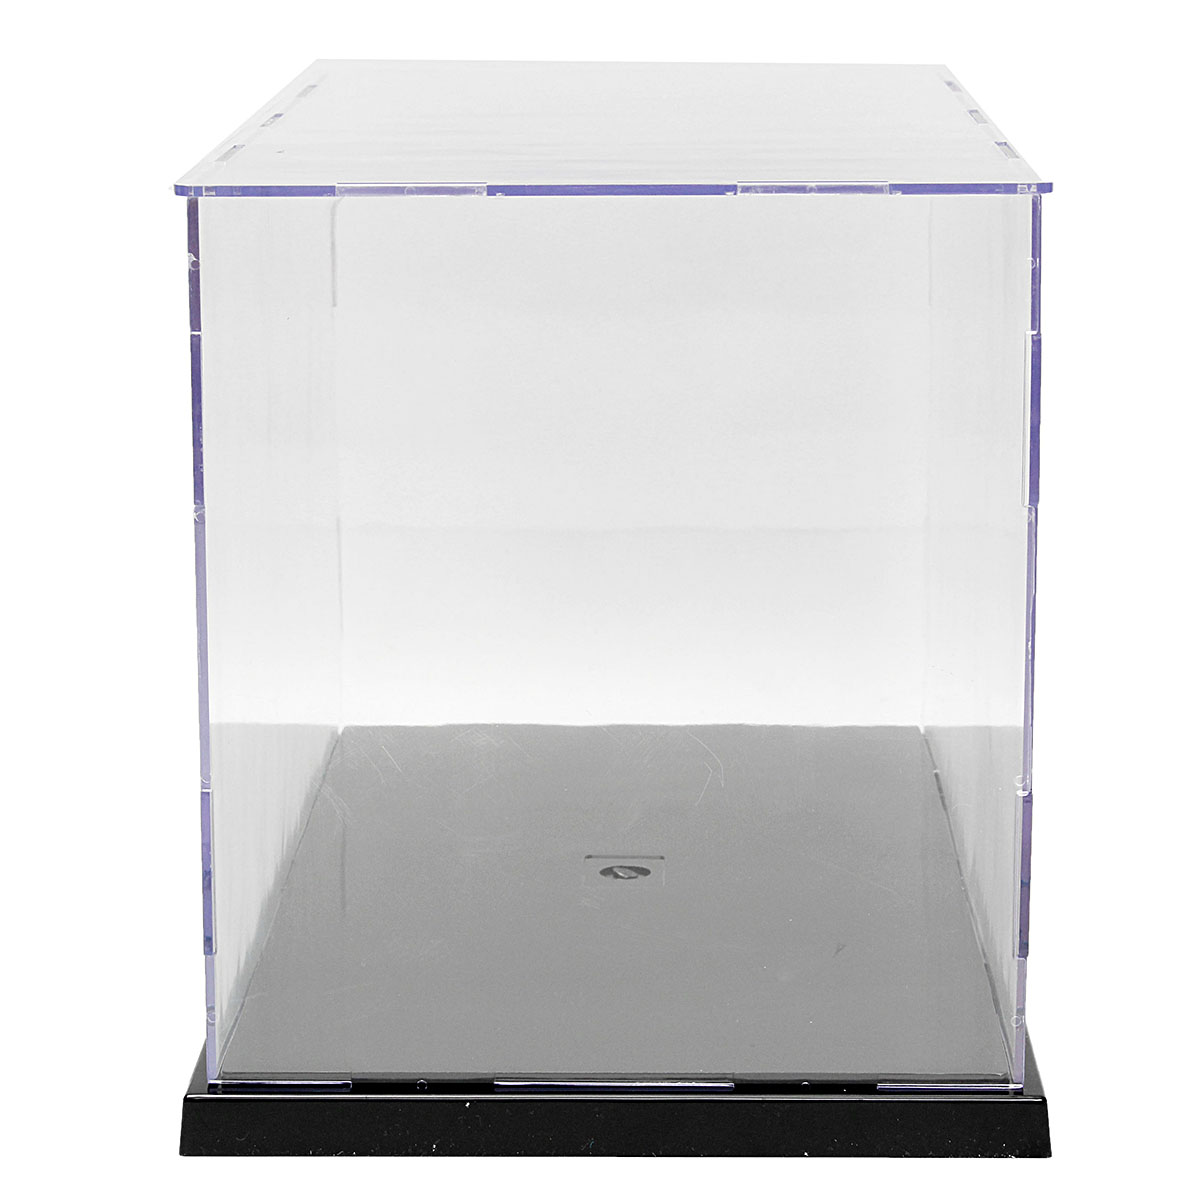 31x17x19cm-Clear-Acrylic-Display-Show-Case-Box-Plastic-Dustproof-Protection-Tray-1196784-2